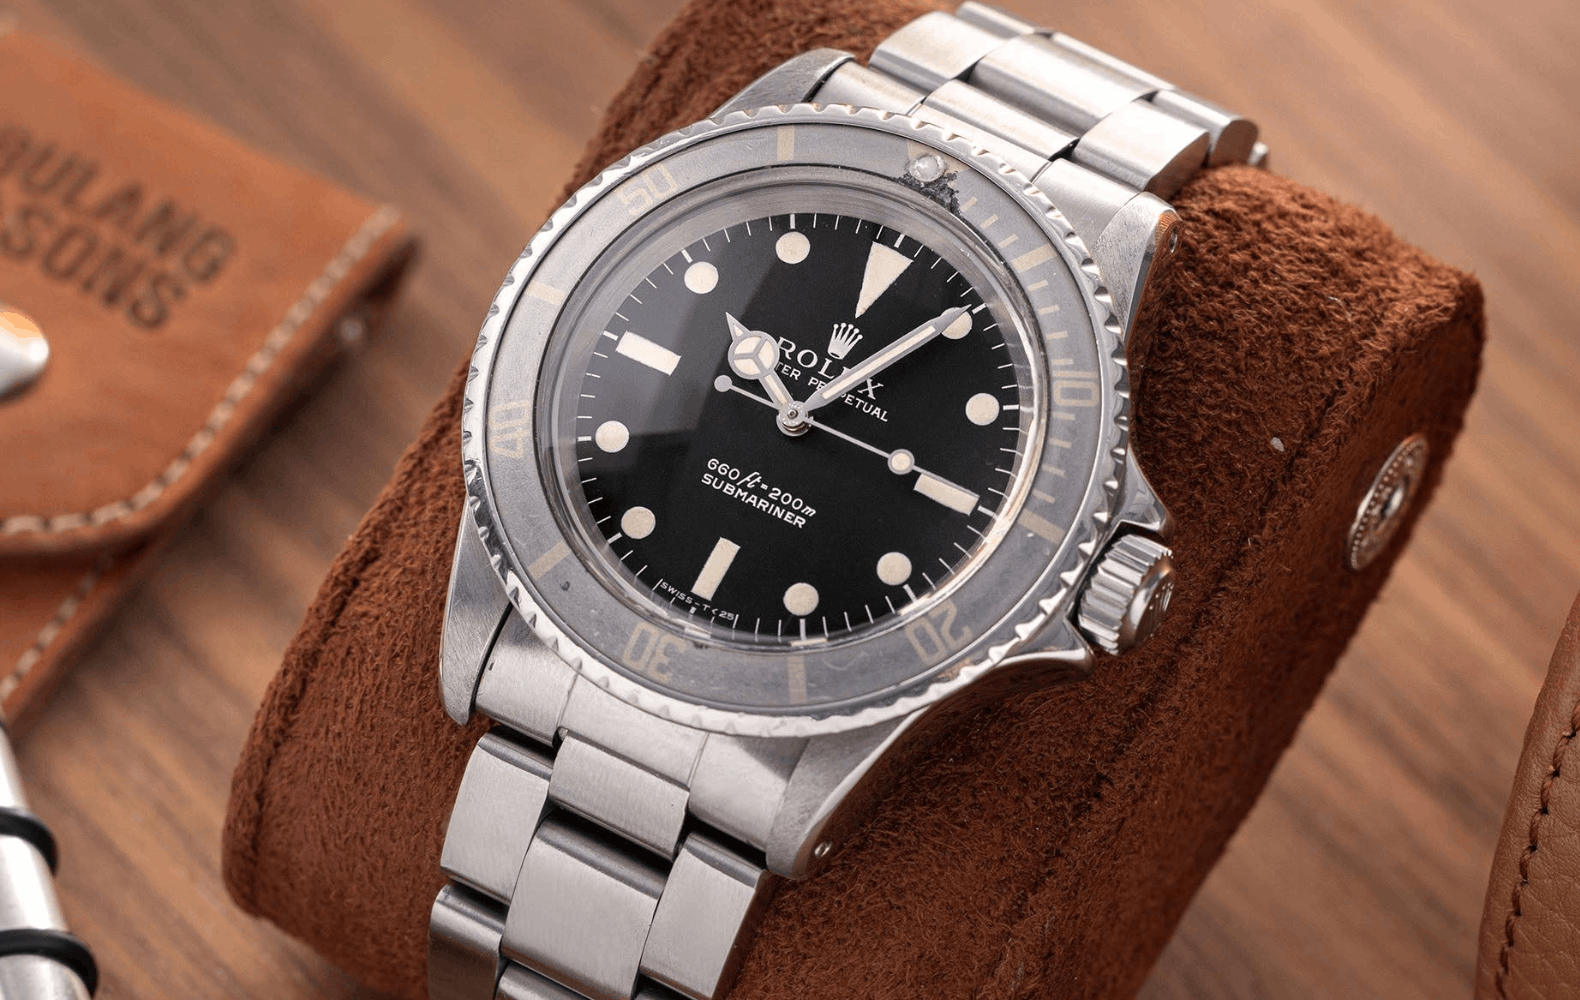 Vintage Rolex Watches: From Cellini to Submariner